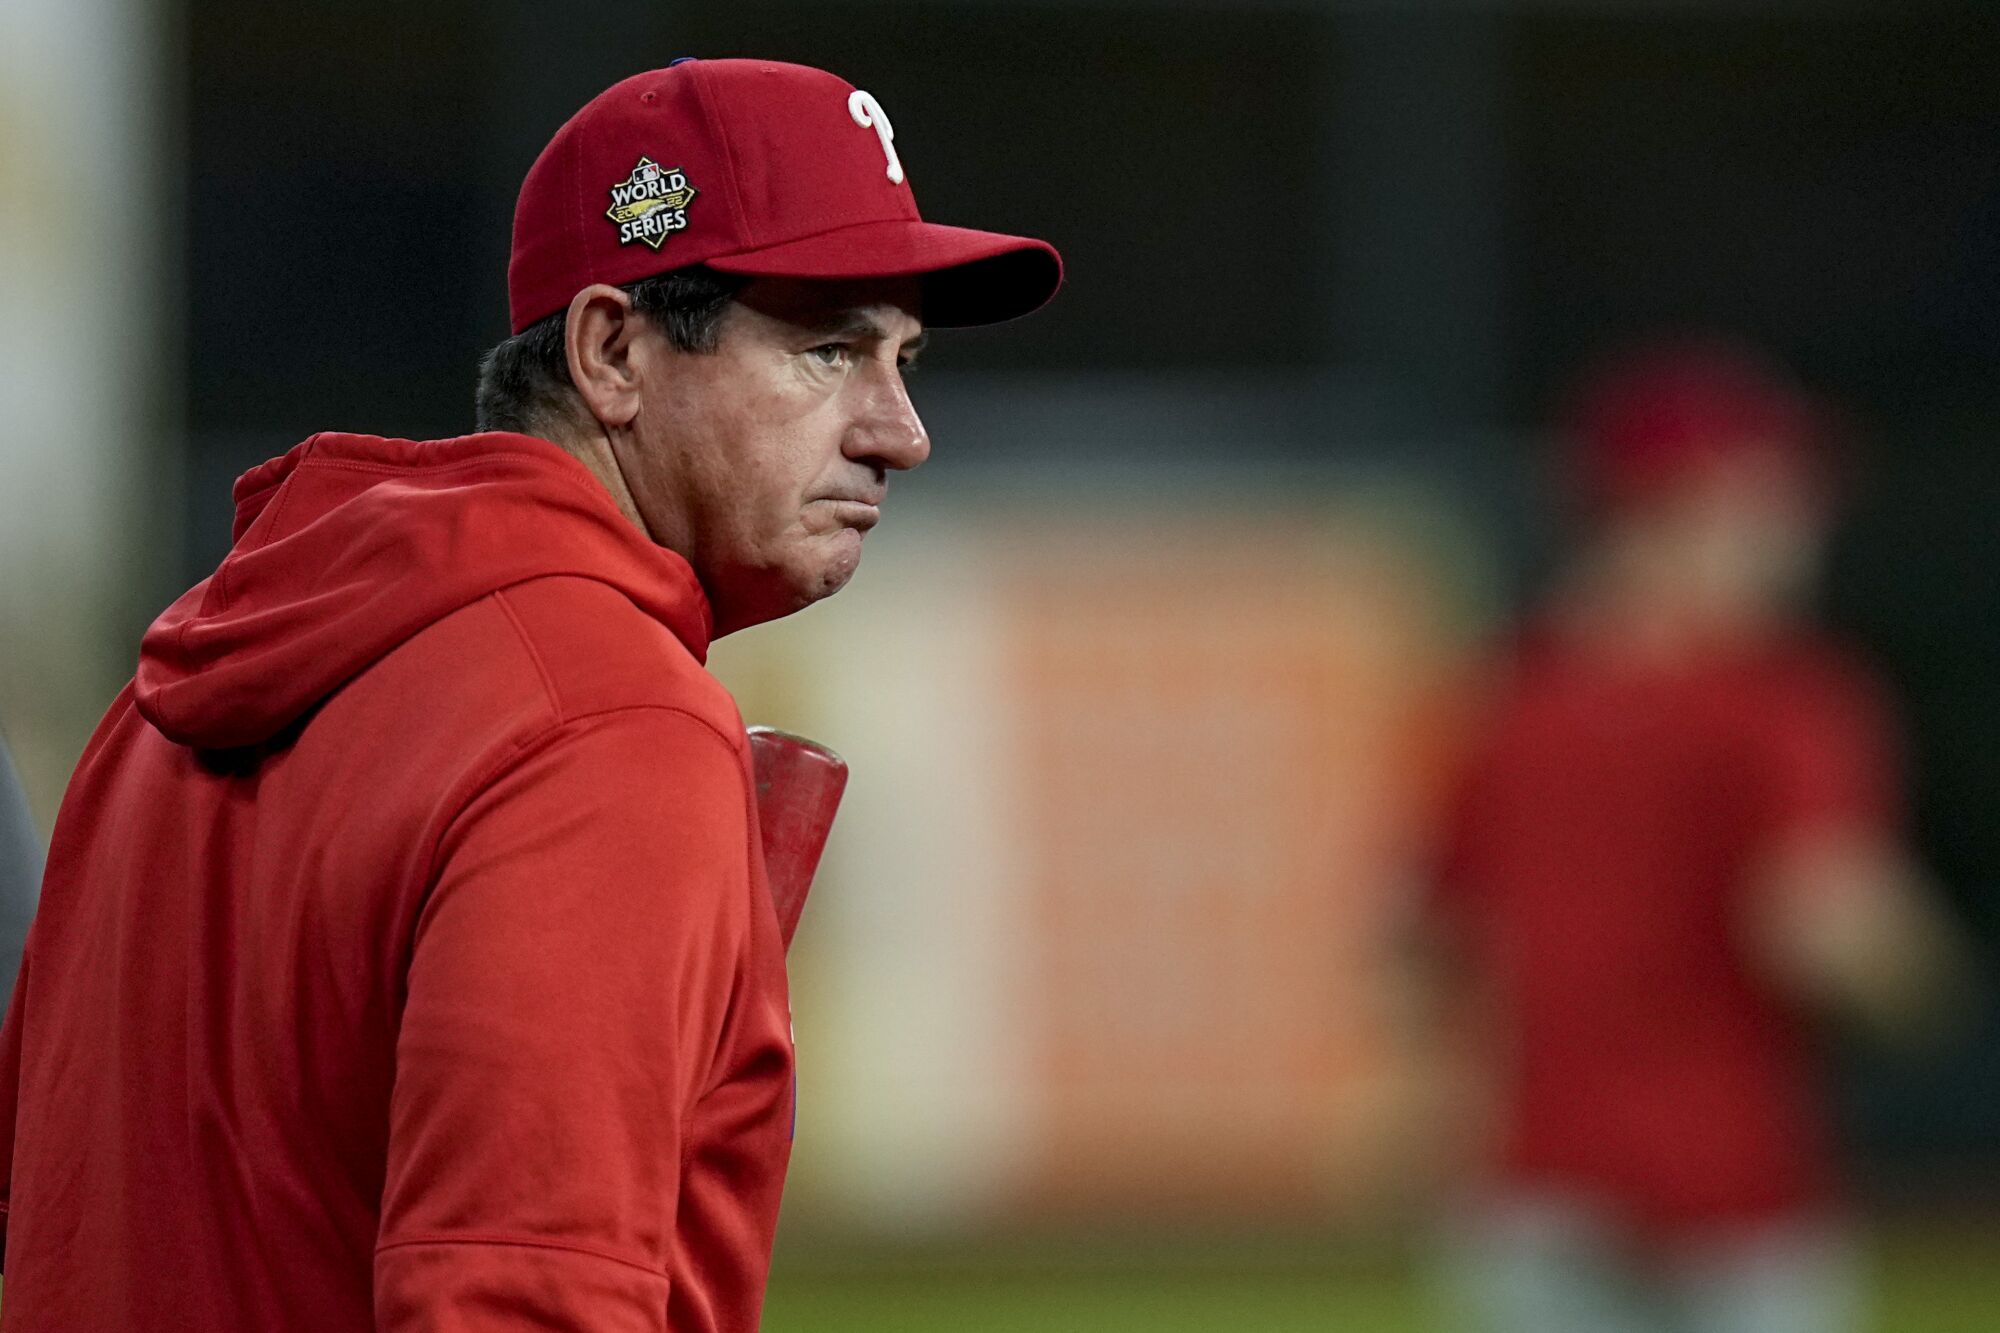 Philadelphia Phillies manager Rob Thomson watches batting practice before Game 2 of the World Series on Oct. 29.